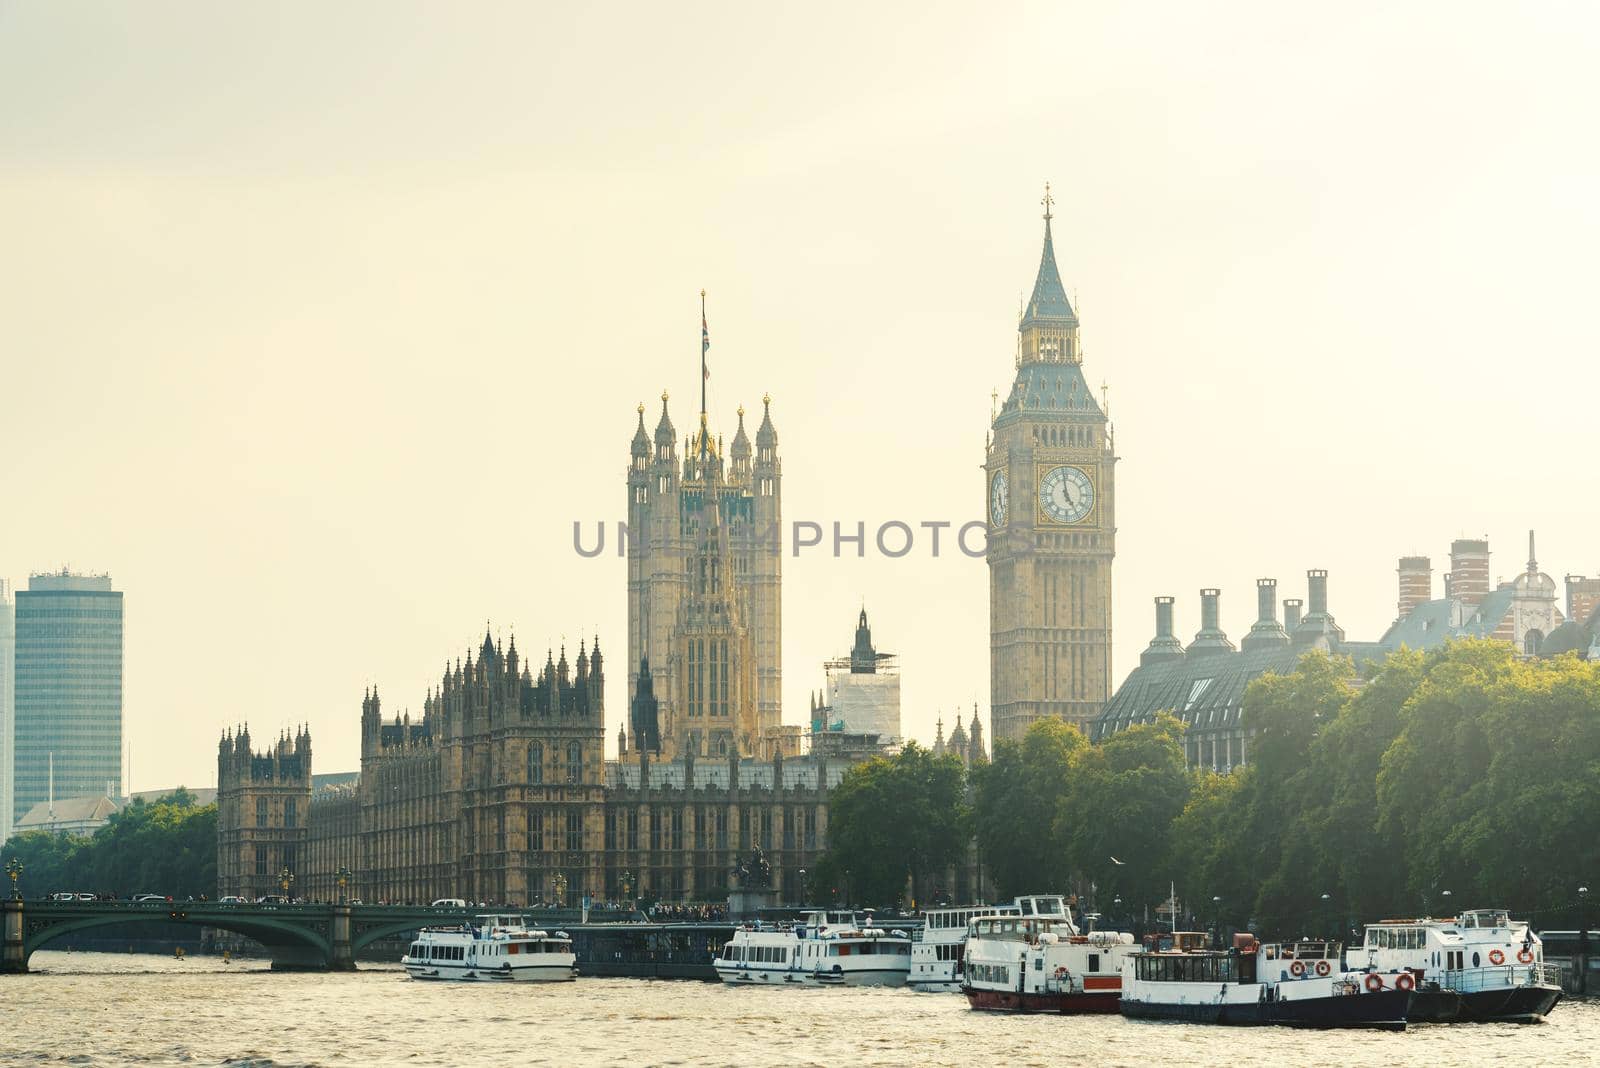 The Palace of Westminster and the Clock Tower in London, UK by dutourdumonde